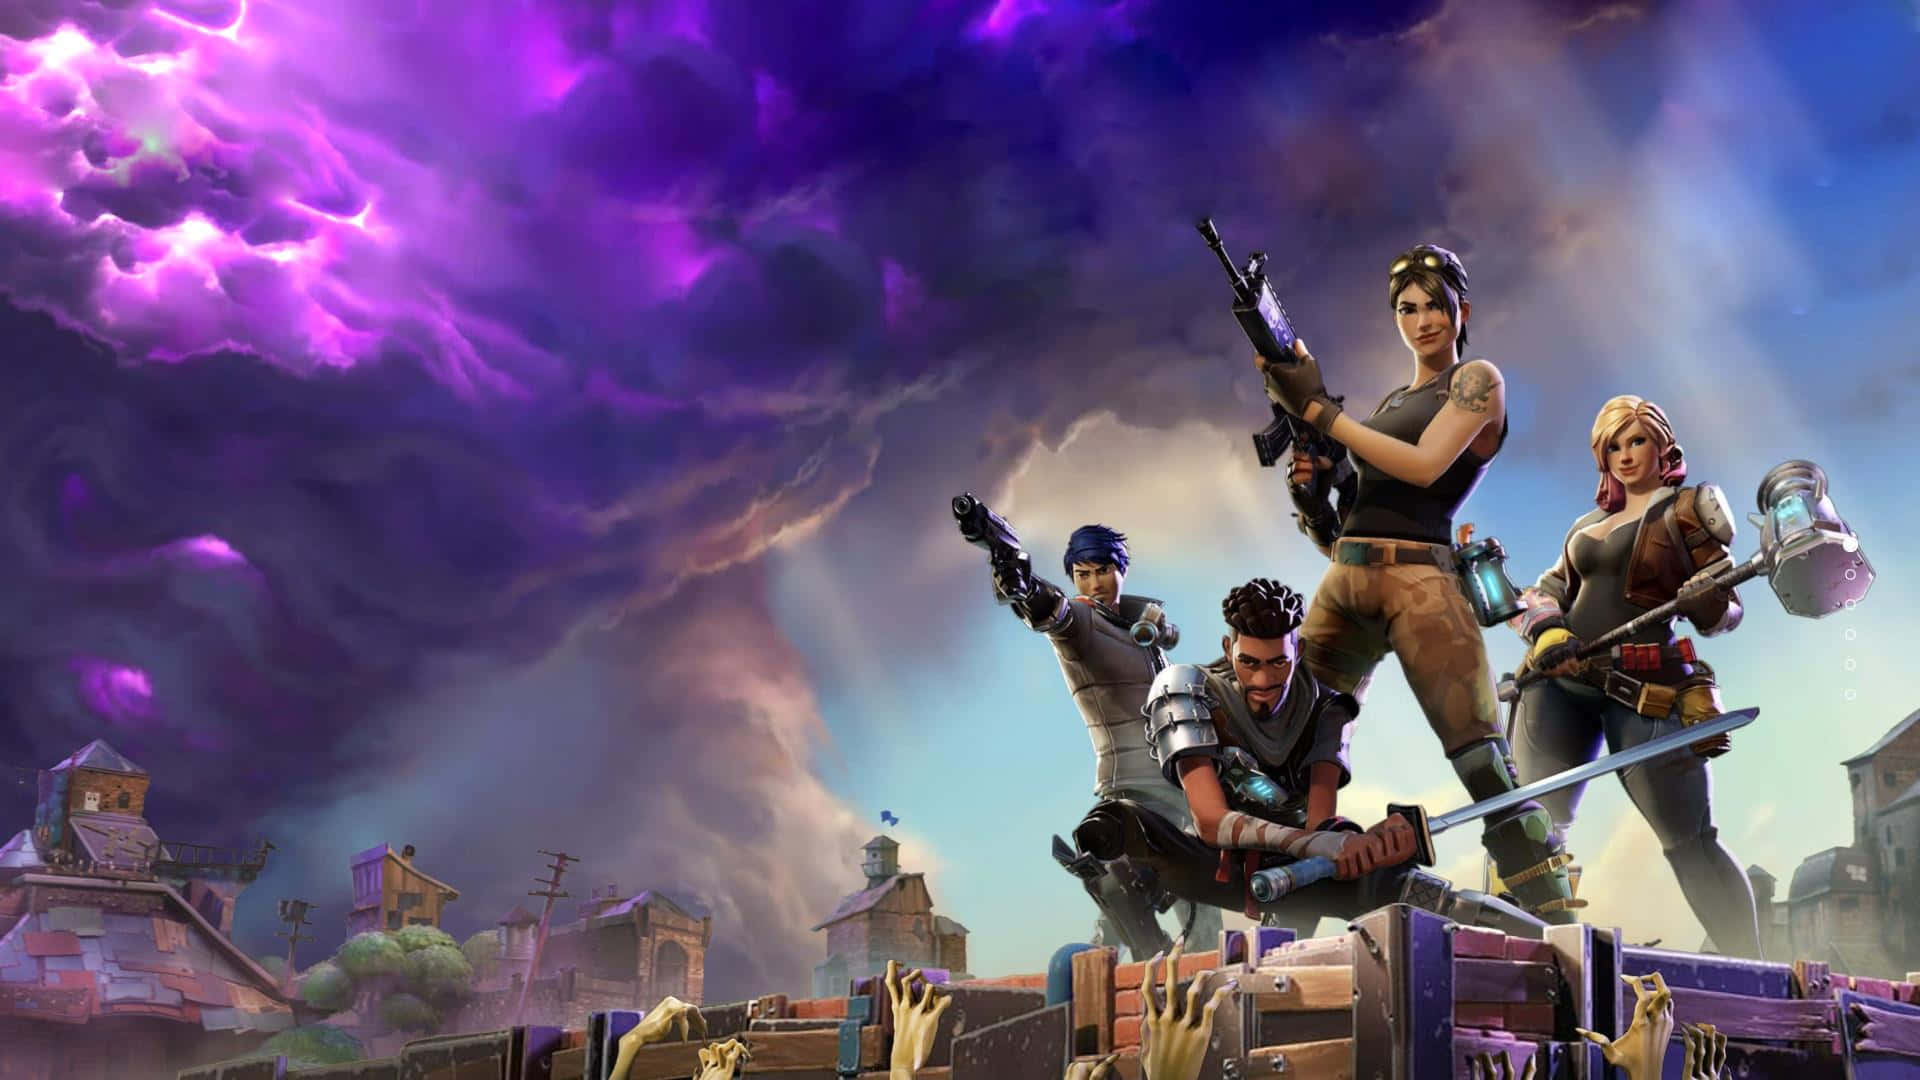 Join the ranks of Fortnite’s millions of players and battle for Victory Royale.